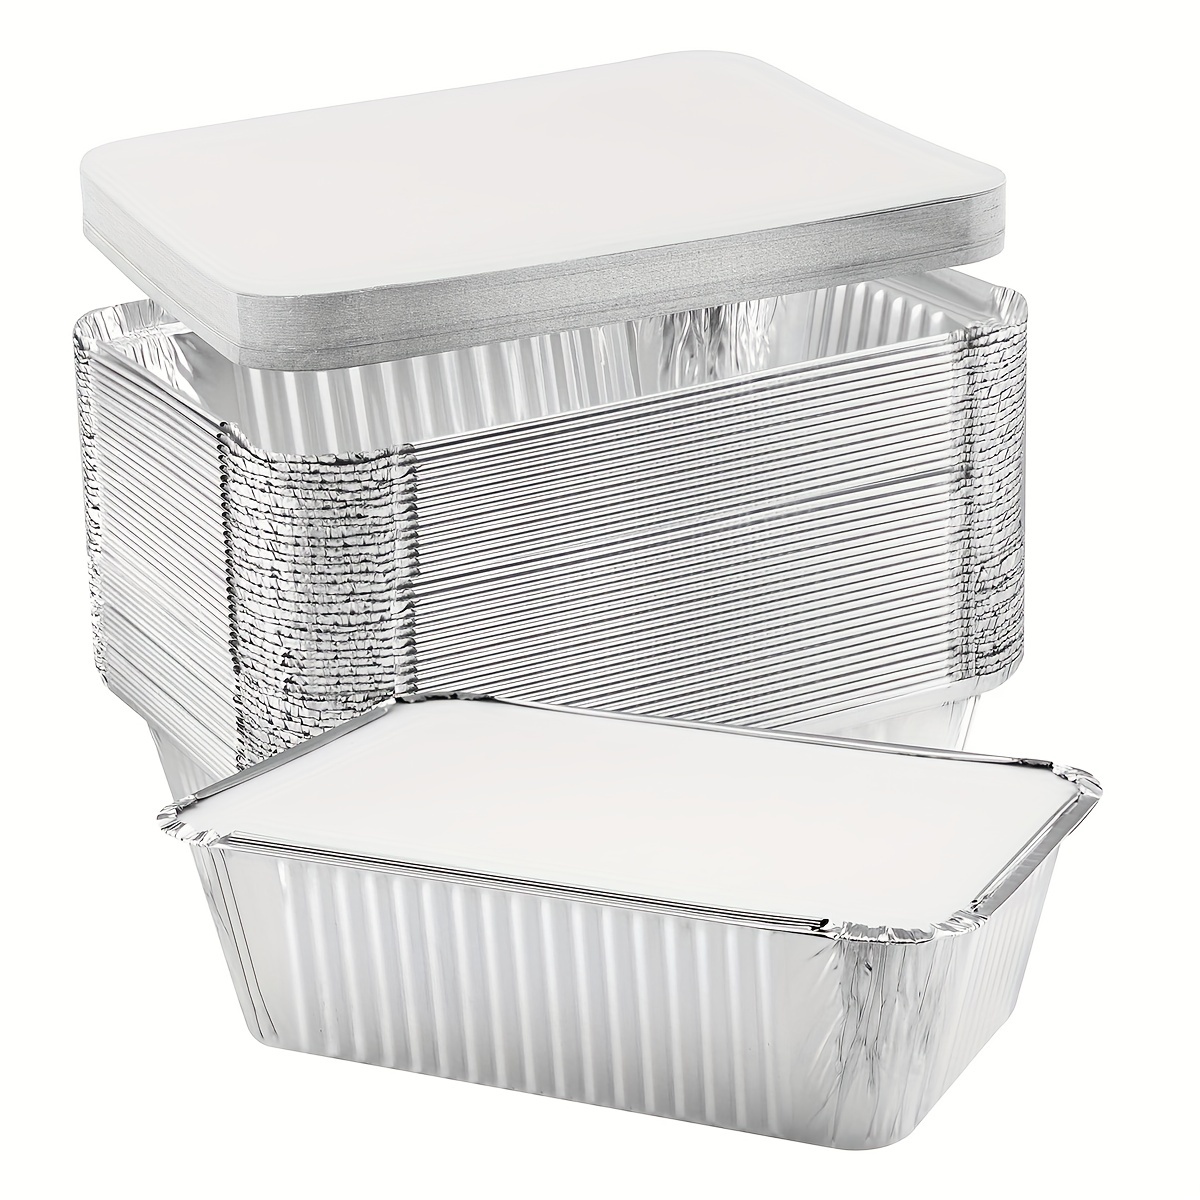 10 X Large Disposable Aluminium Baking Roasting Foil Trays with Lid  Containers for Broiling Cooking Food Storage